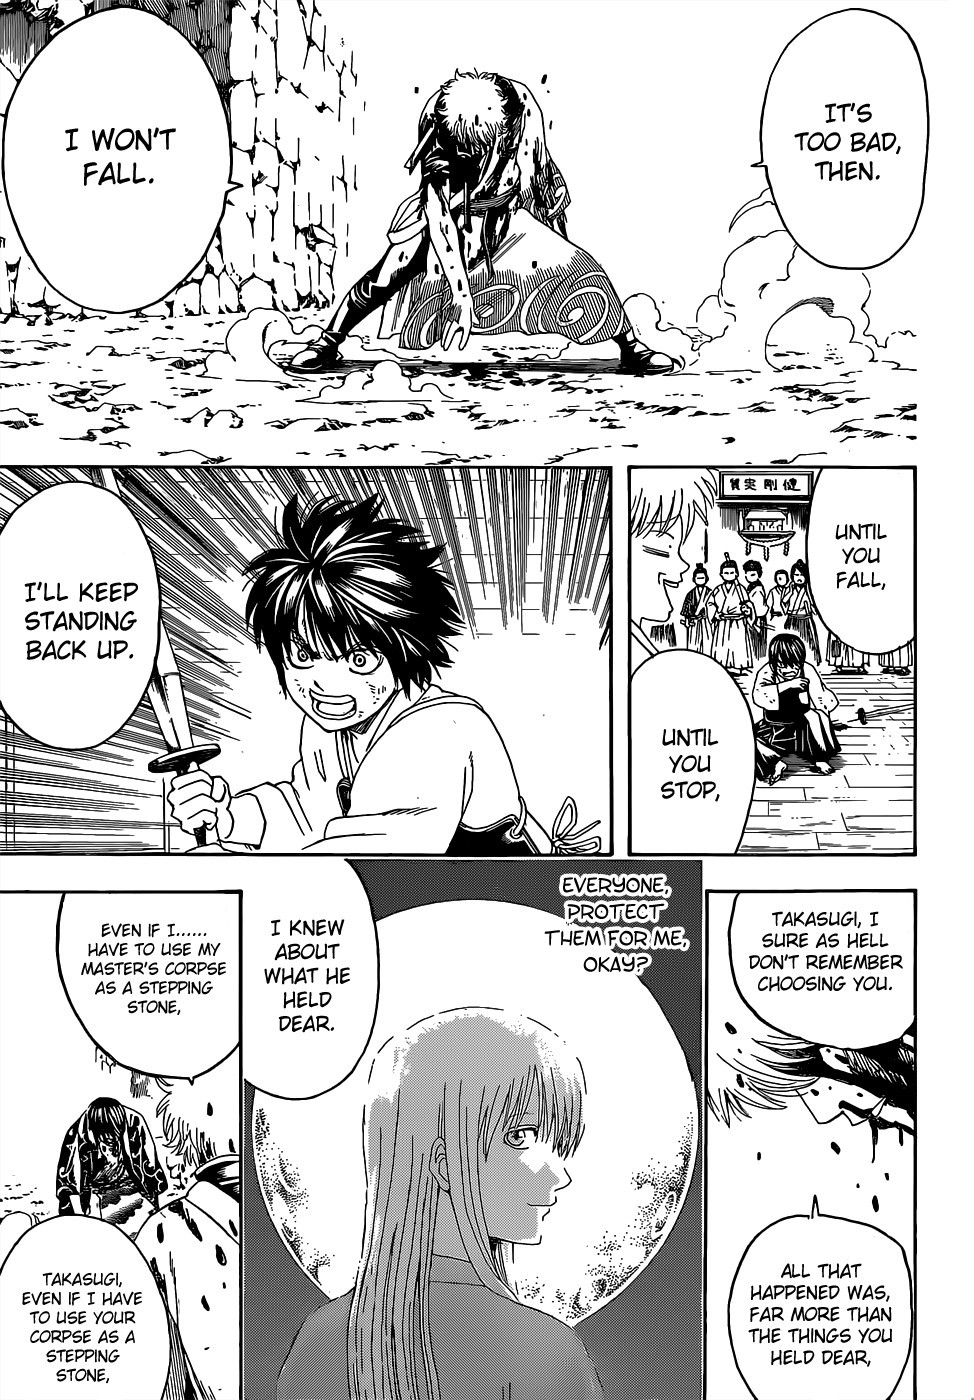 Gintama chapter 520 page 16